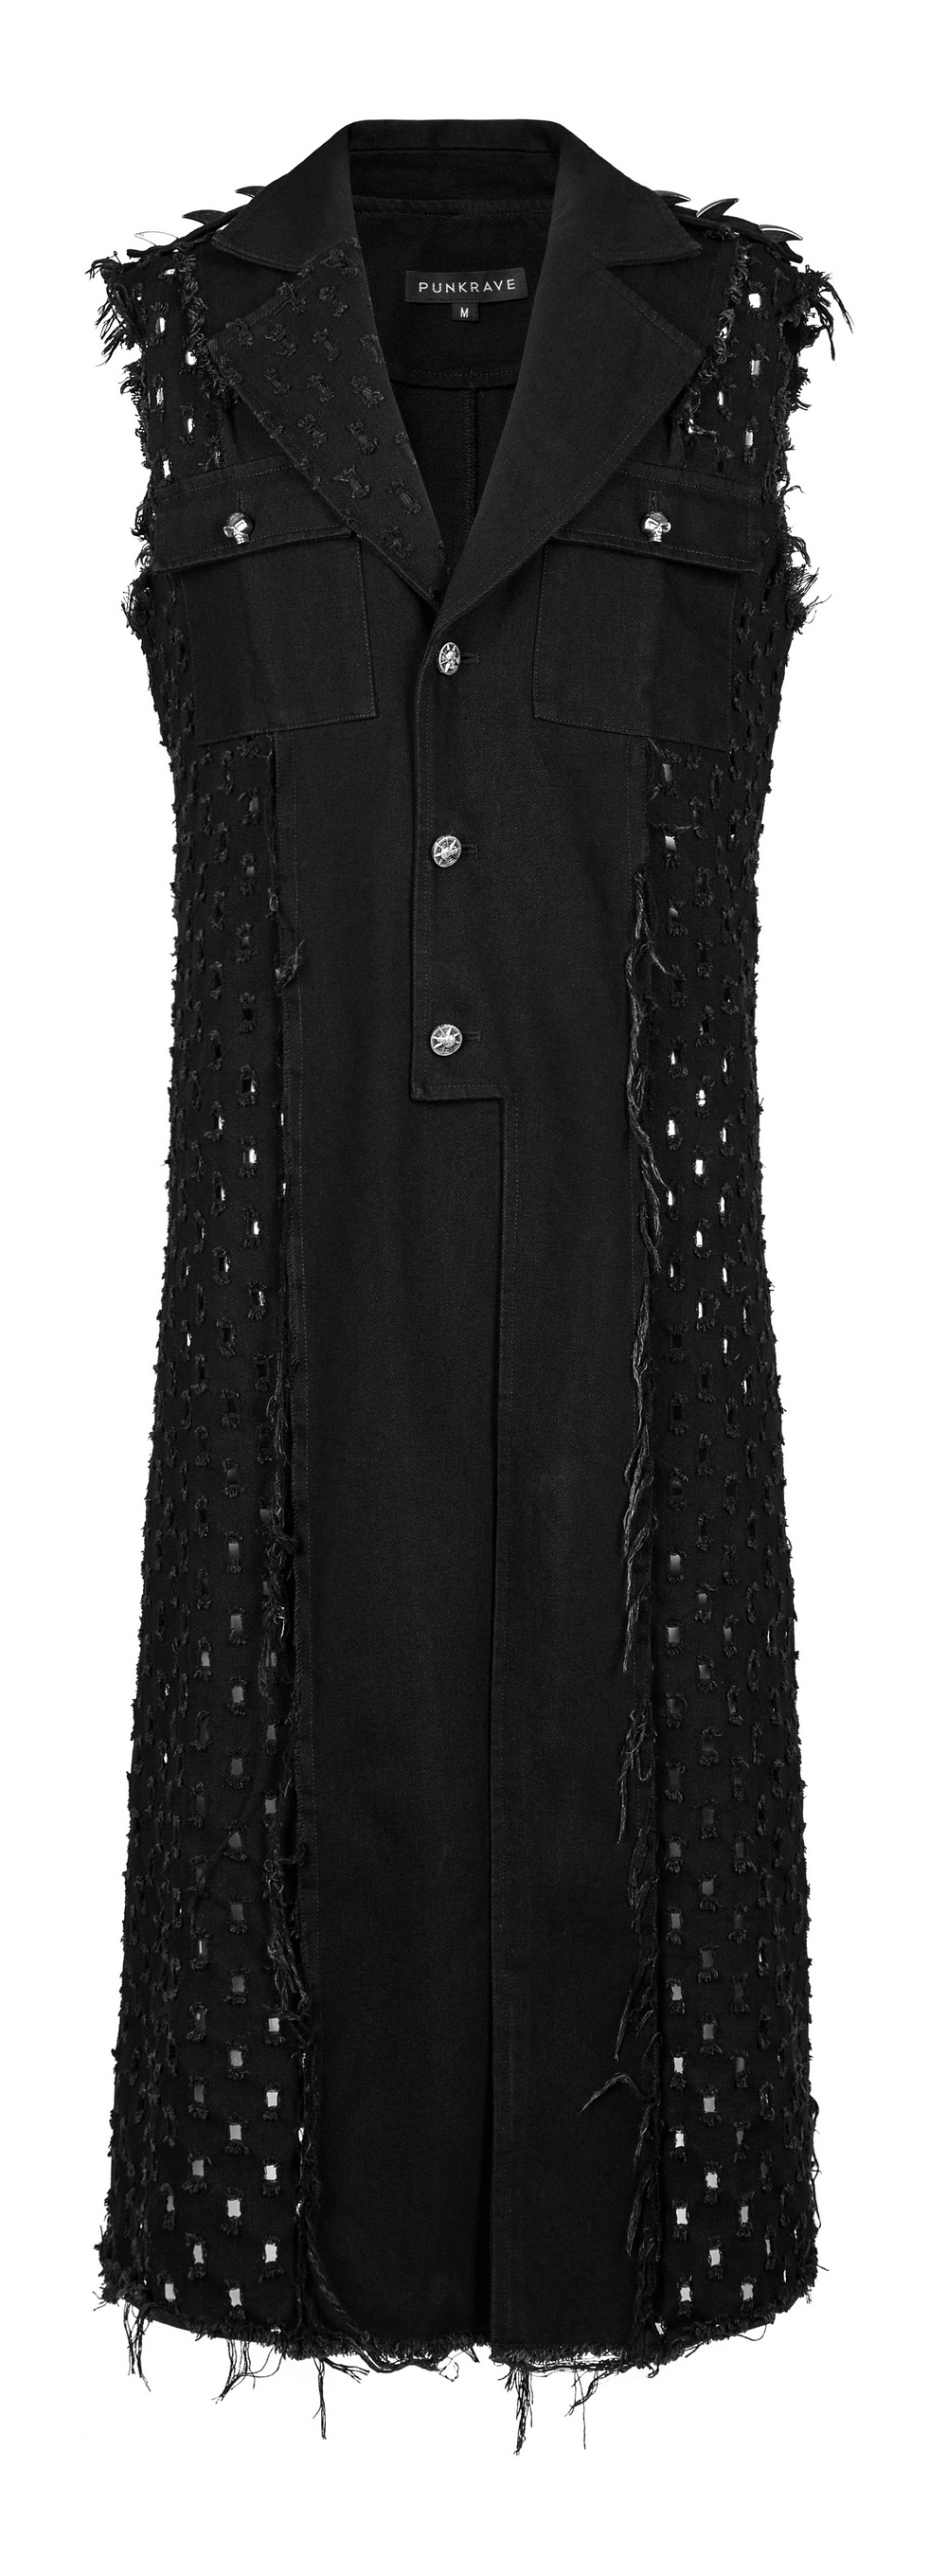 Edgy Punk Old Medium-Length Cape with Distressed Detailing - HARD'N'HEAVY